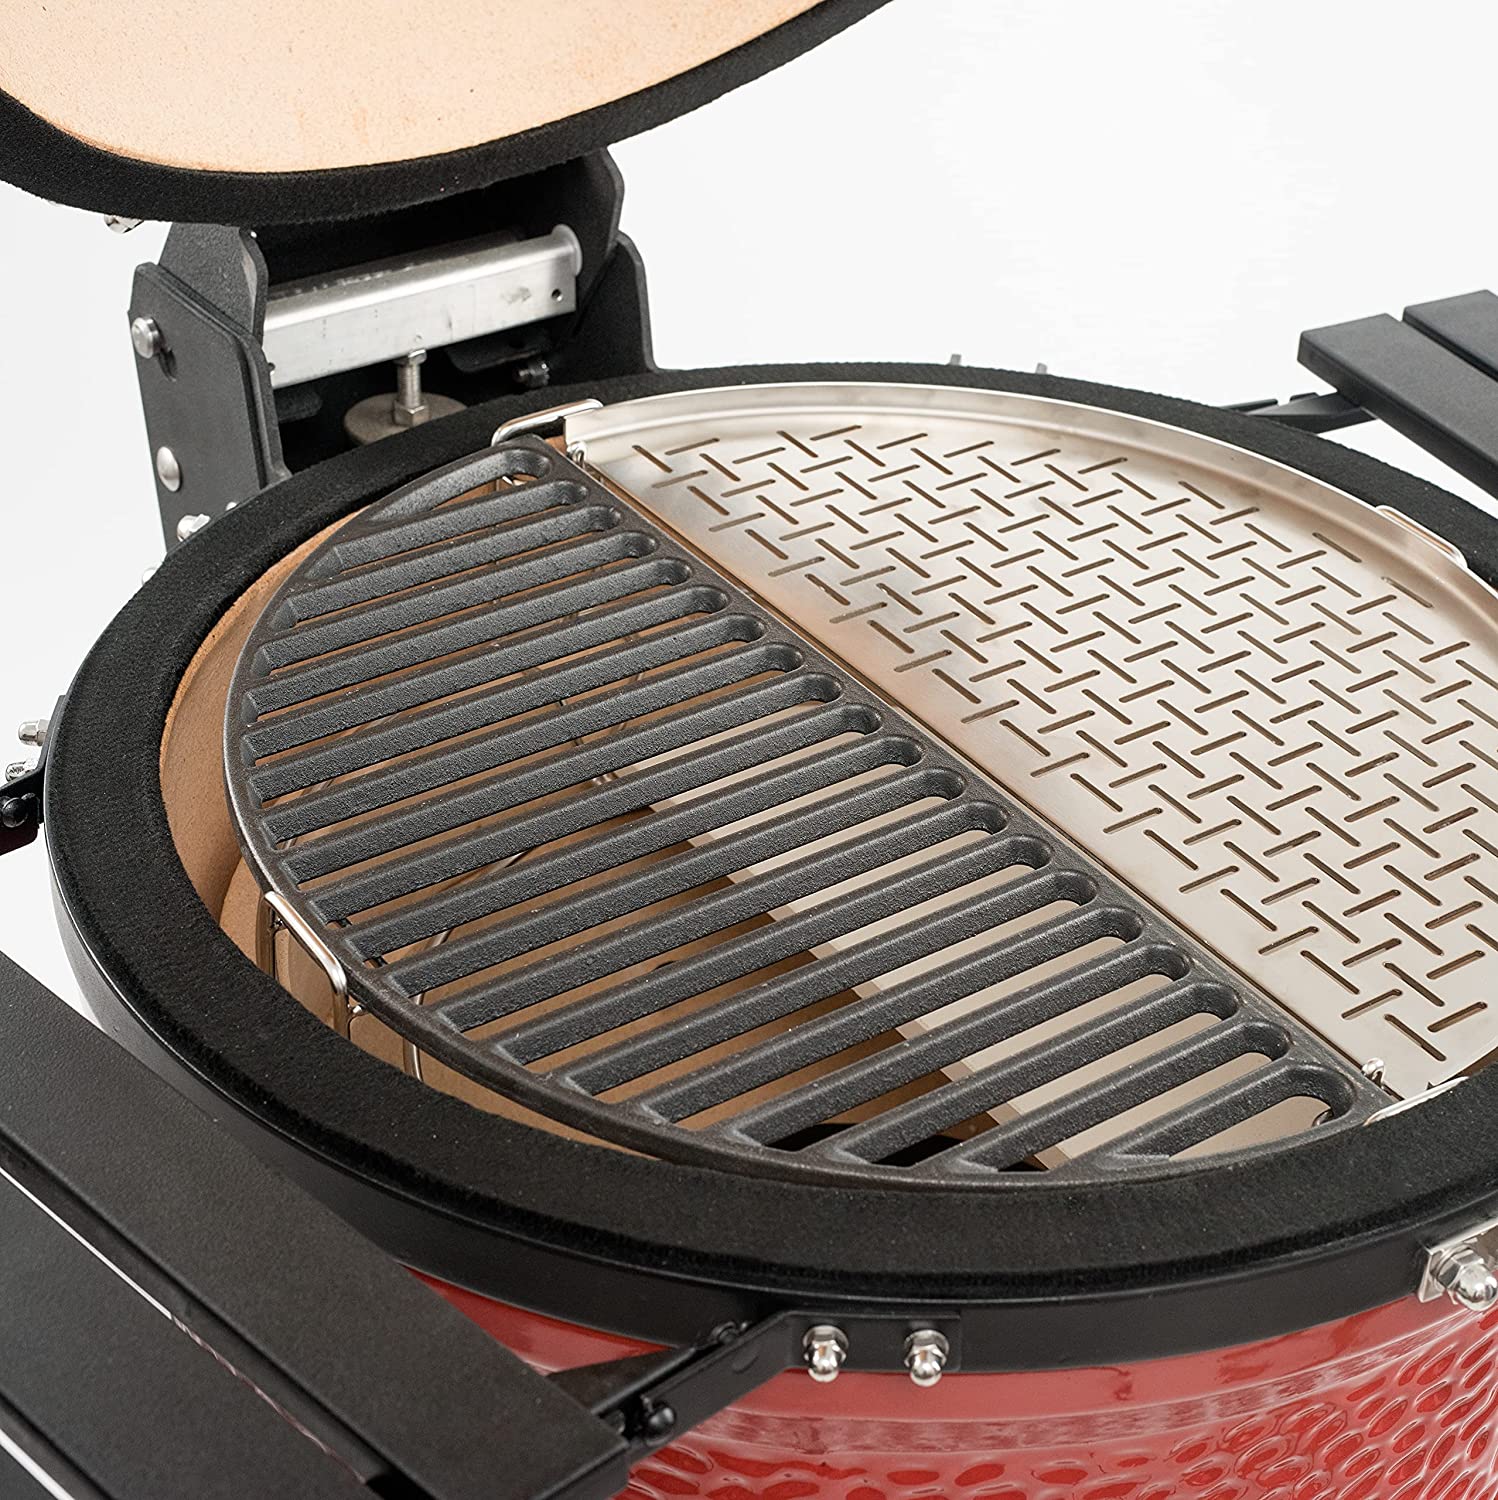 Half moon cast iron cooking grate and stainless steel surface in Kamado Joe Classic II